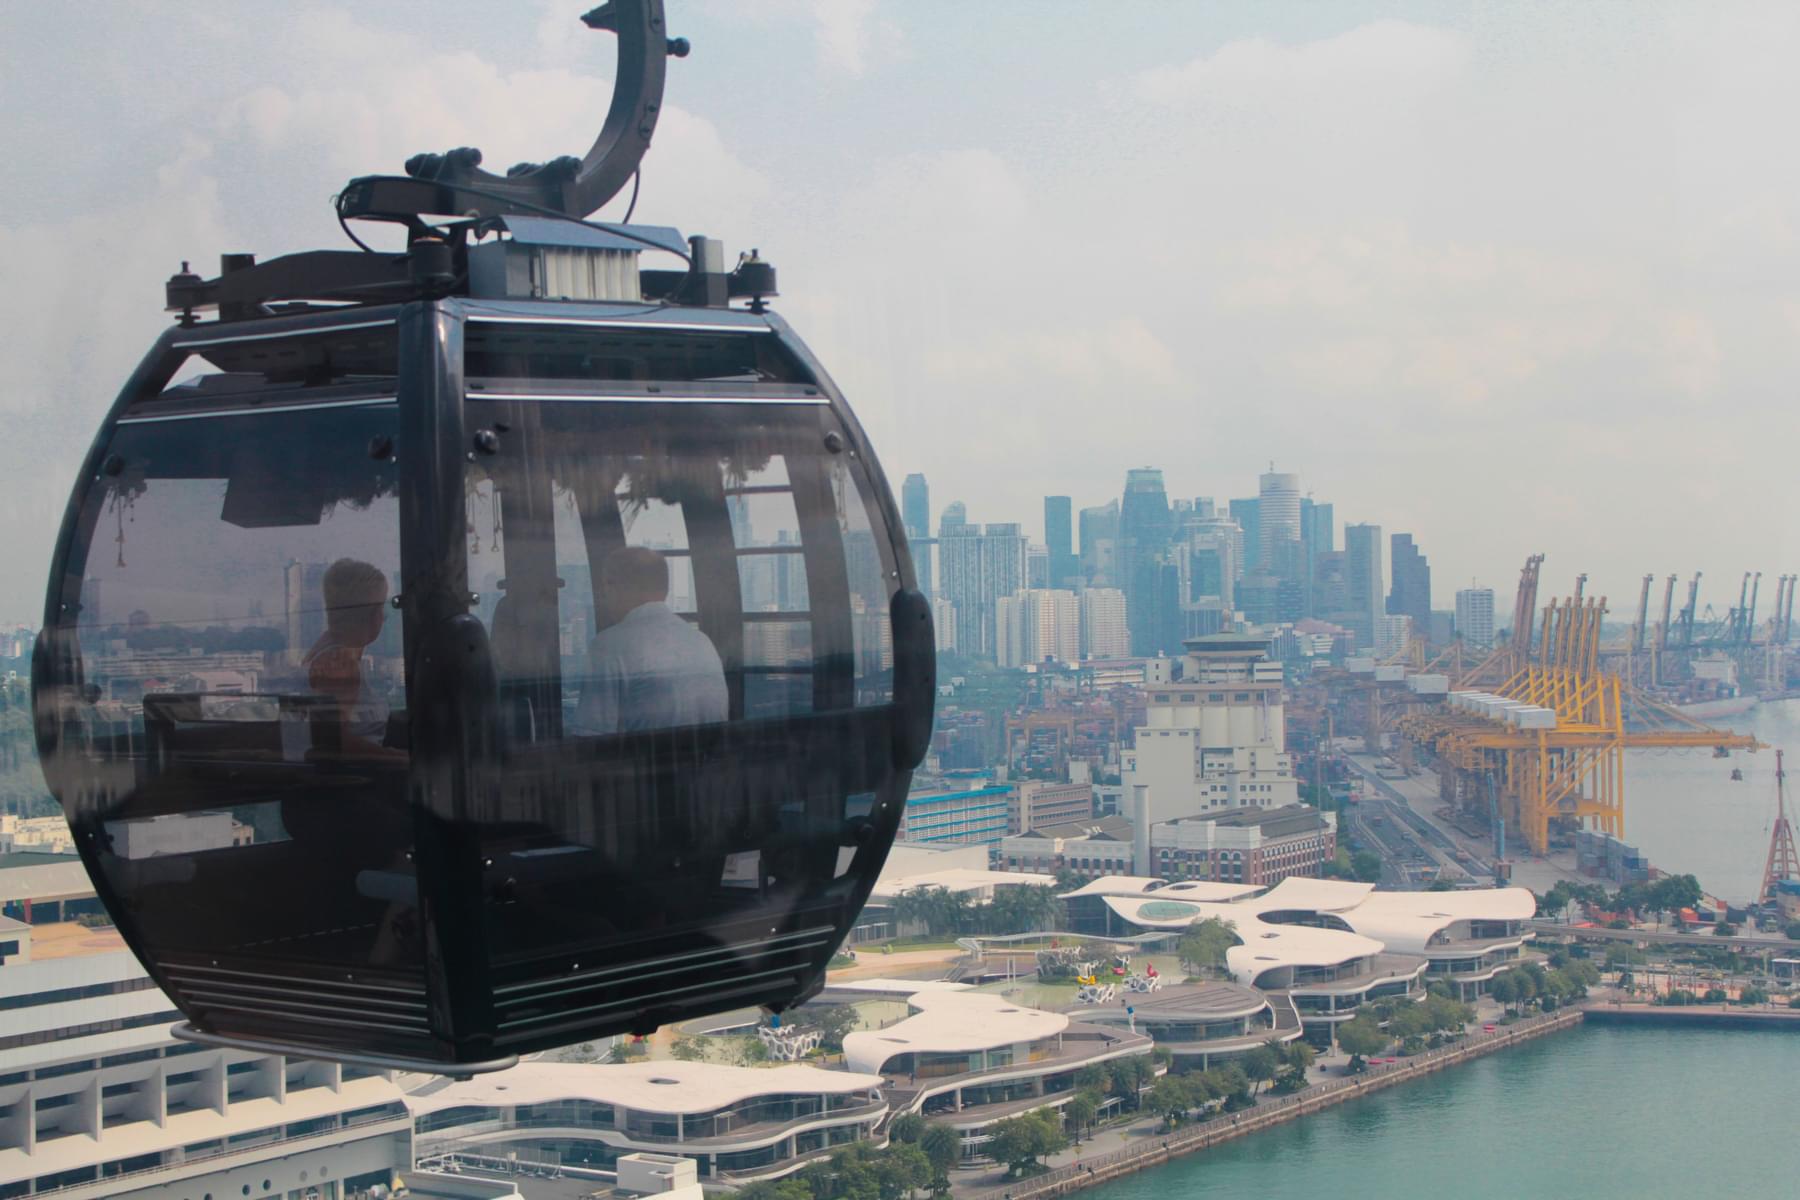 Ride the Singapore Cable Car